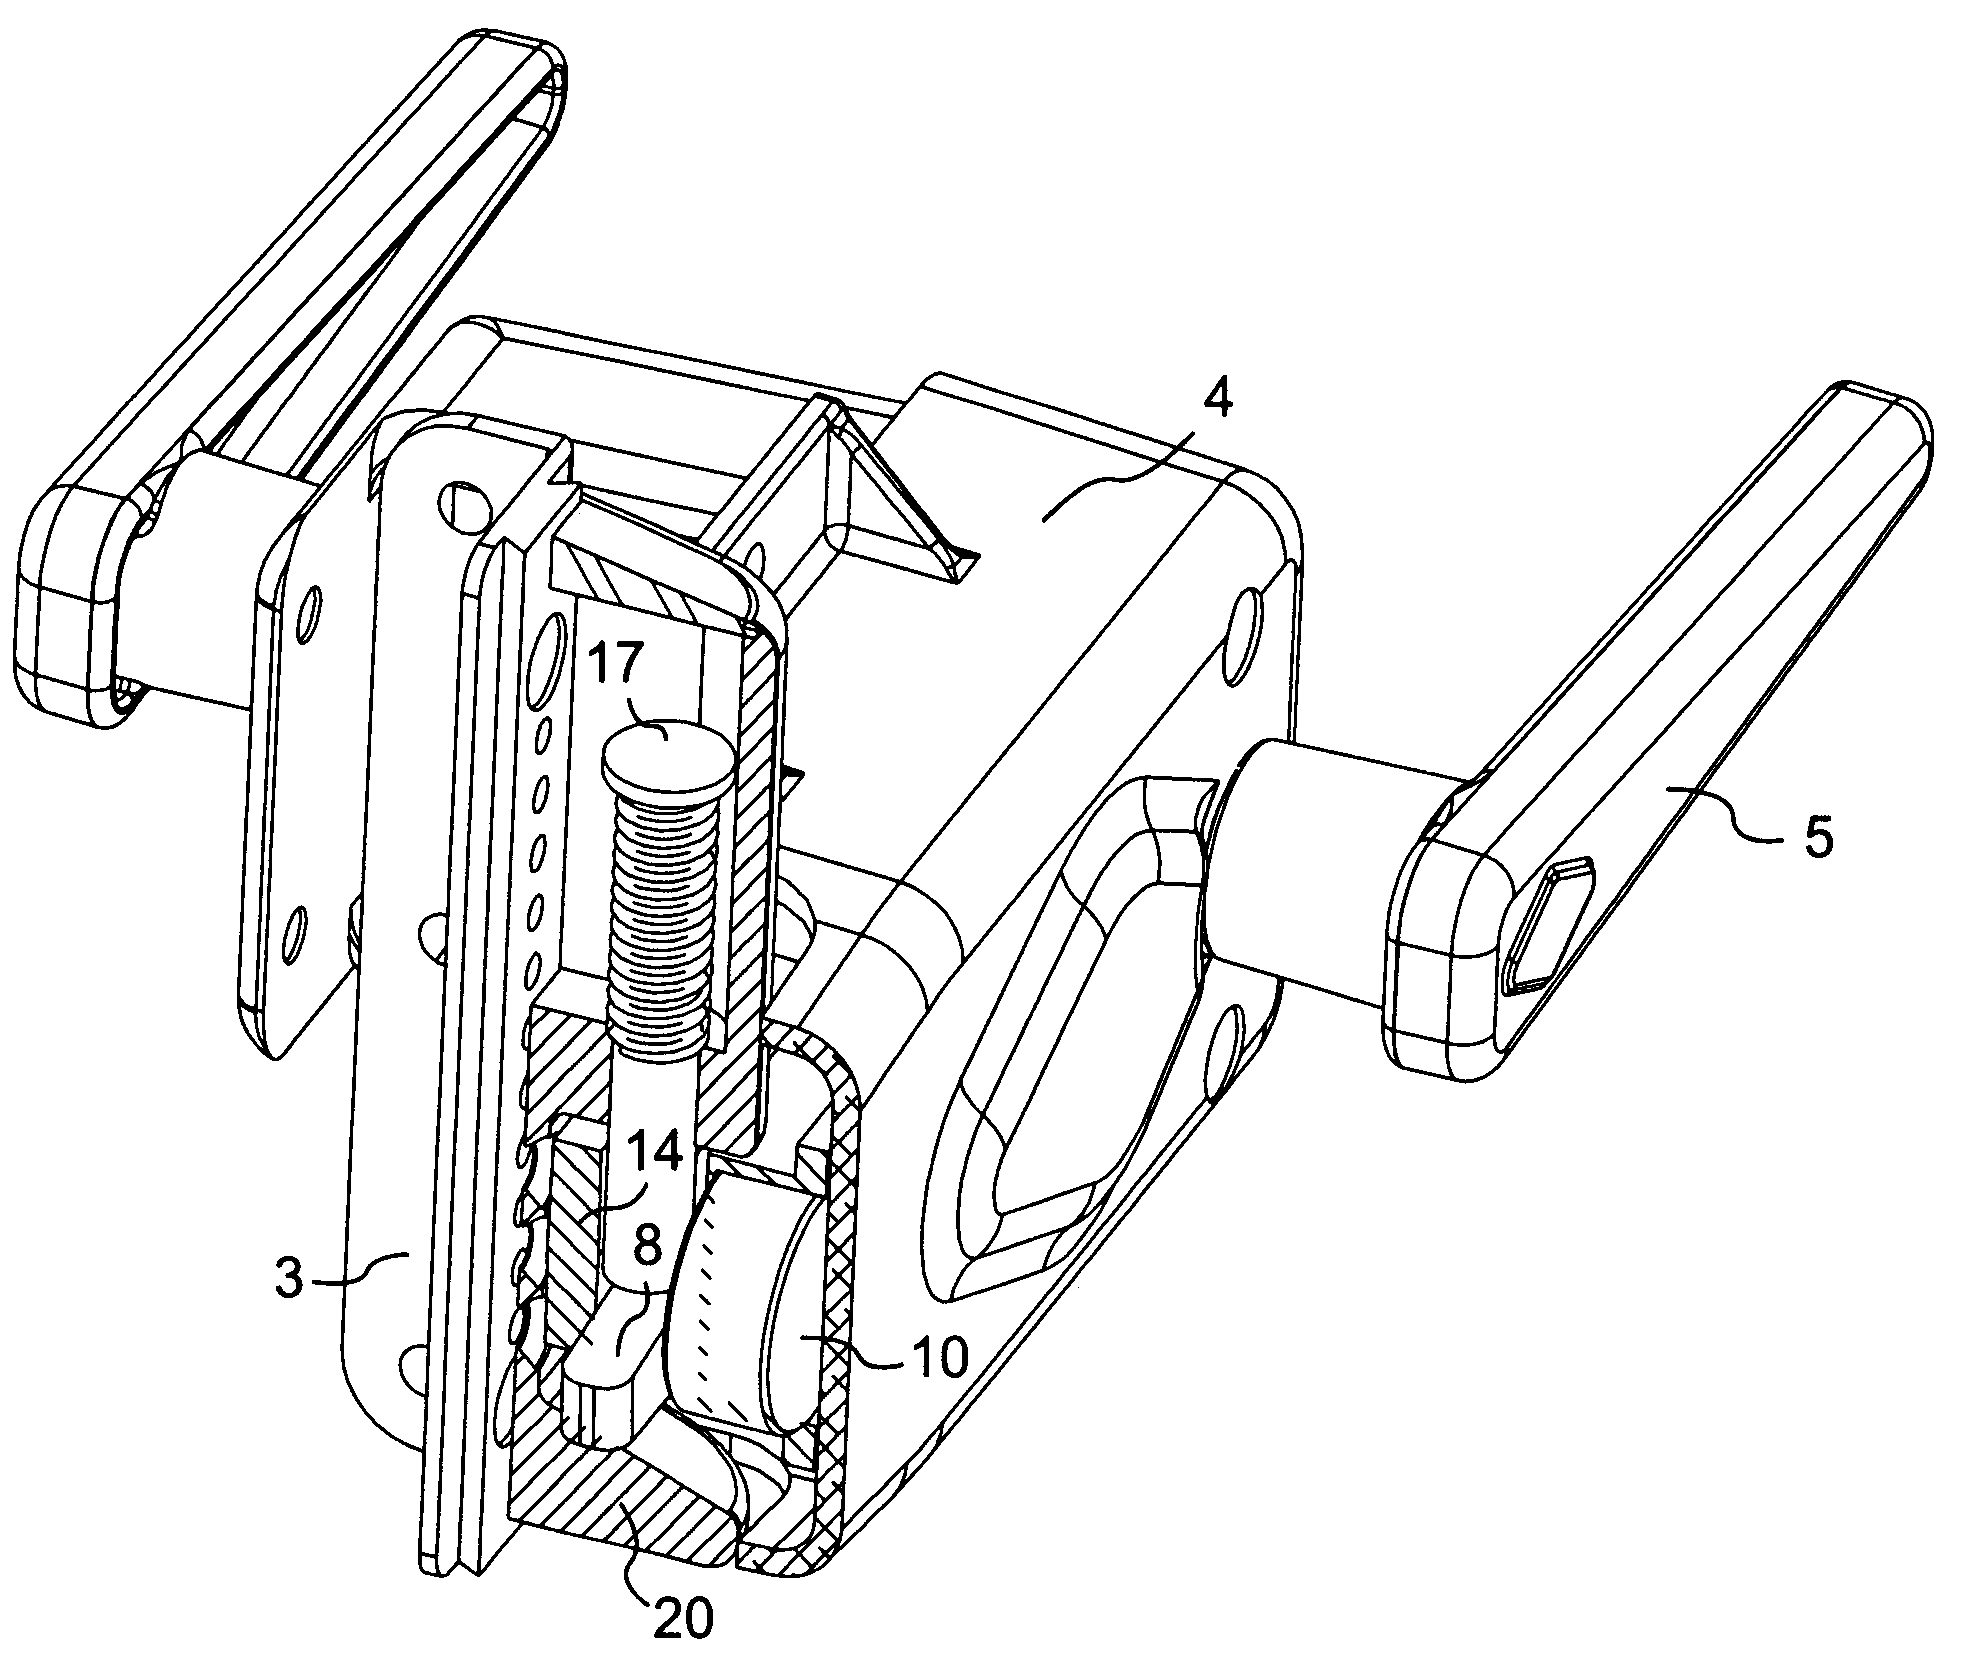 Magnetic latch system